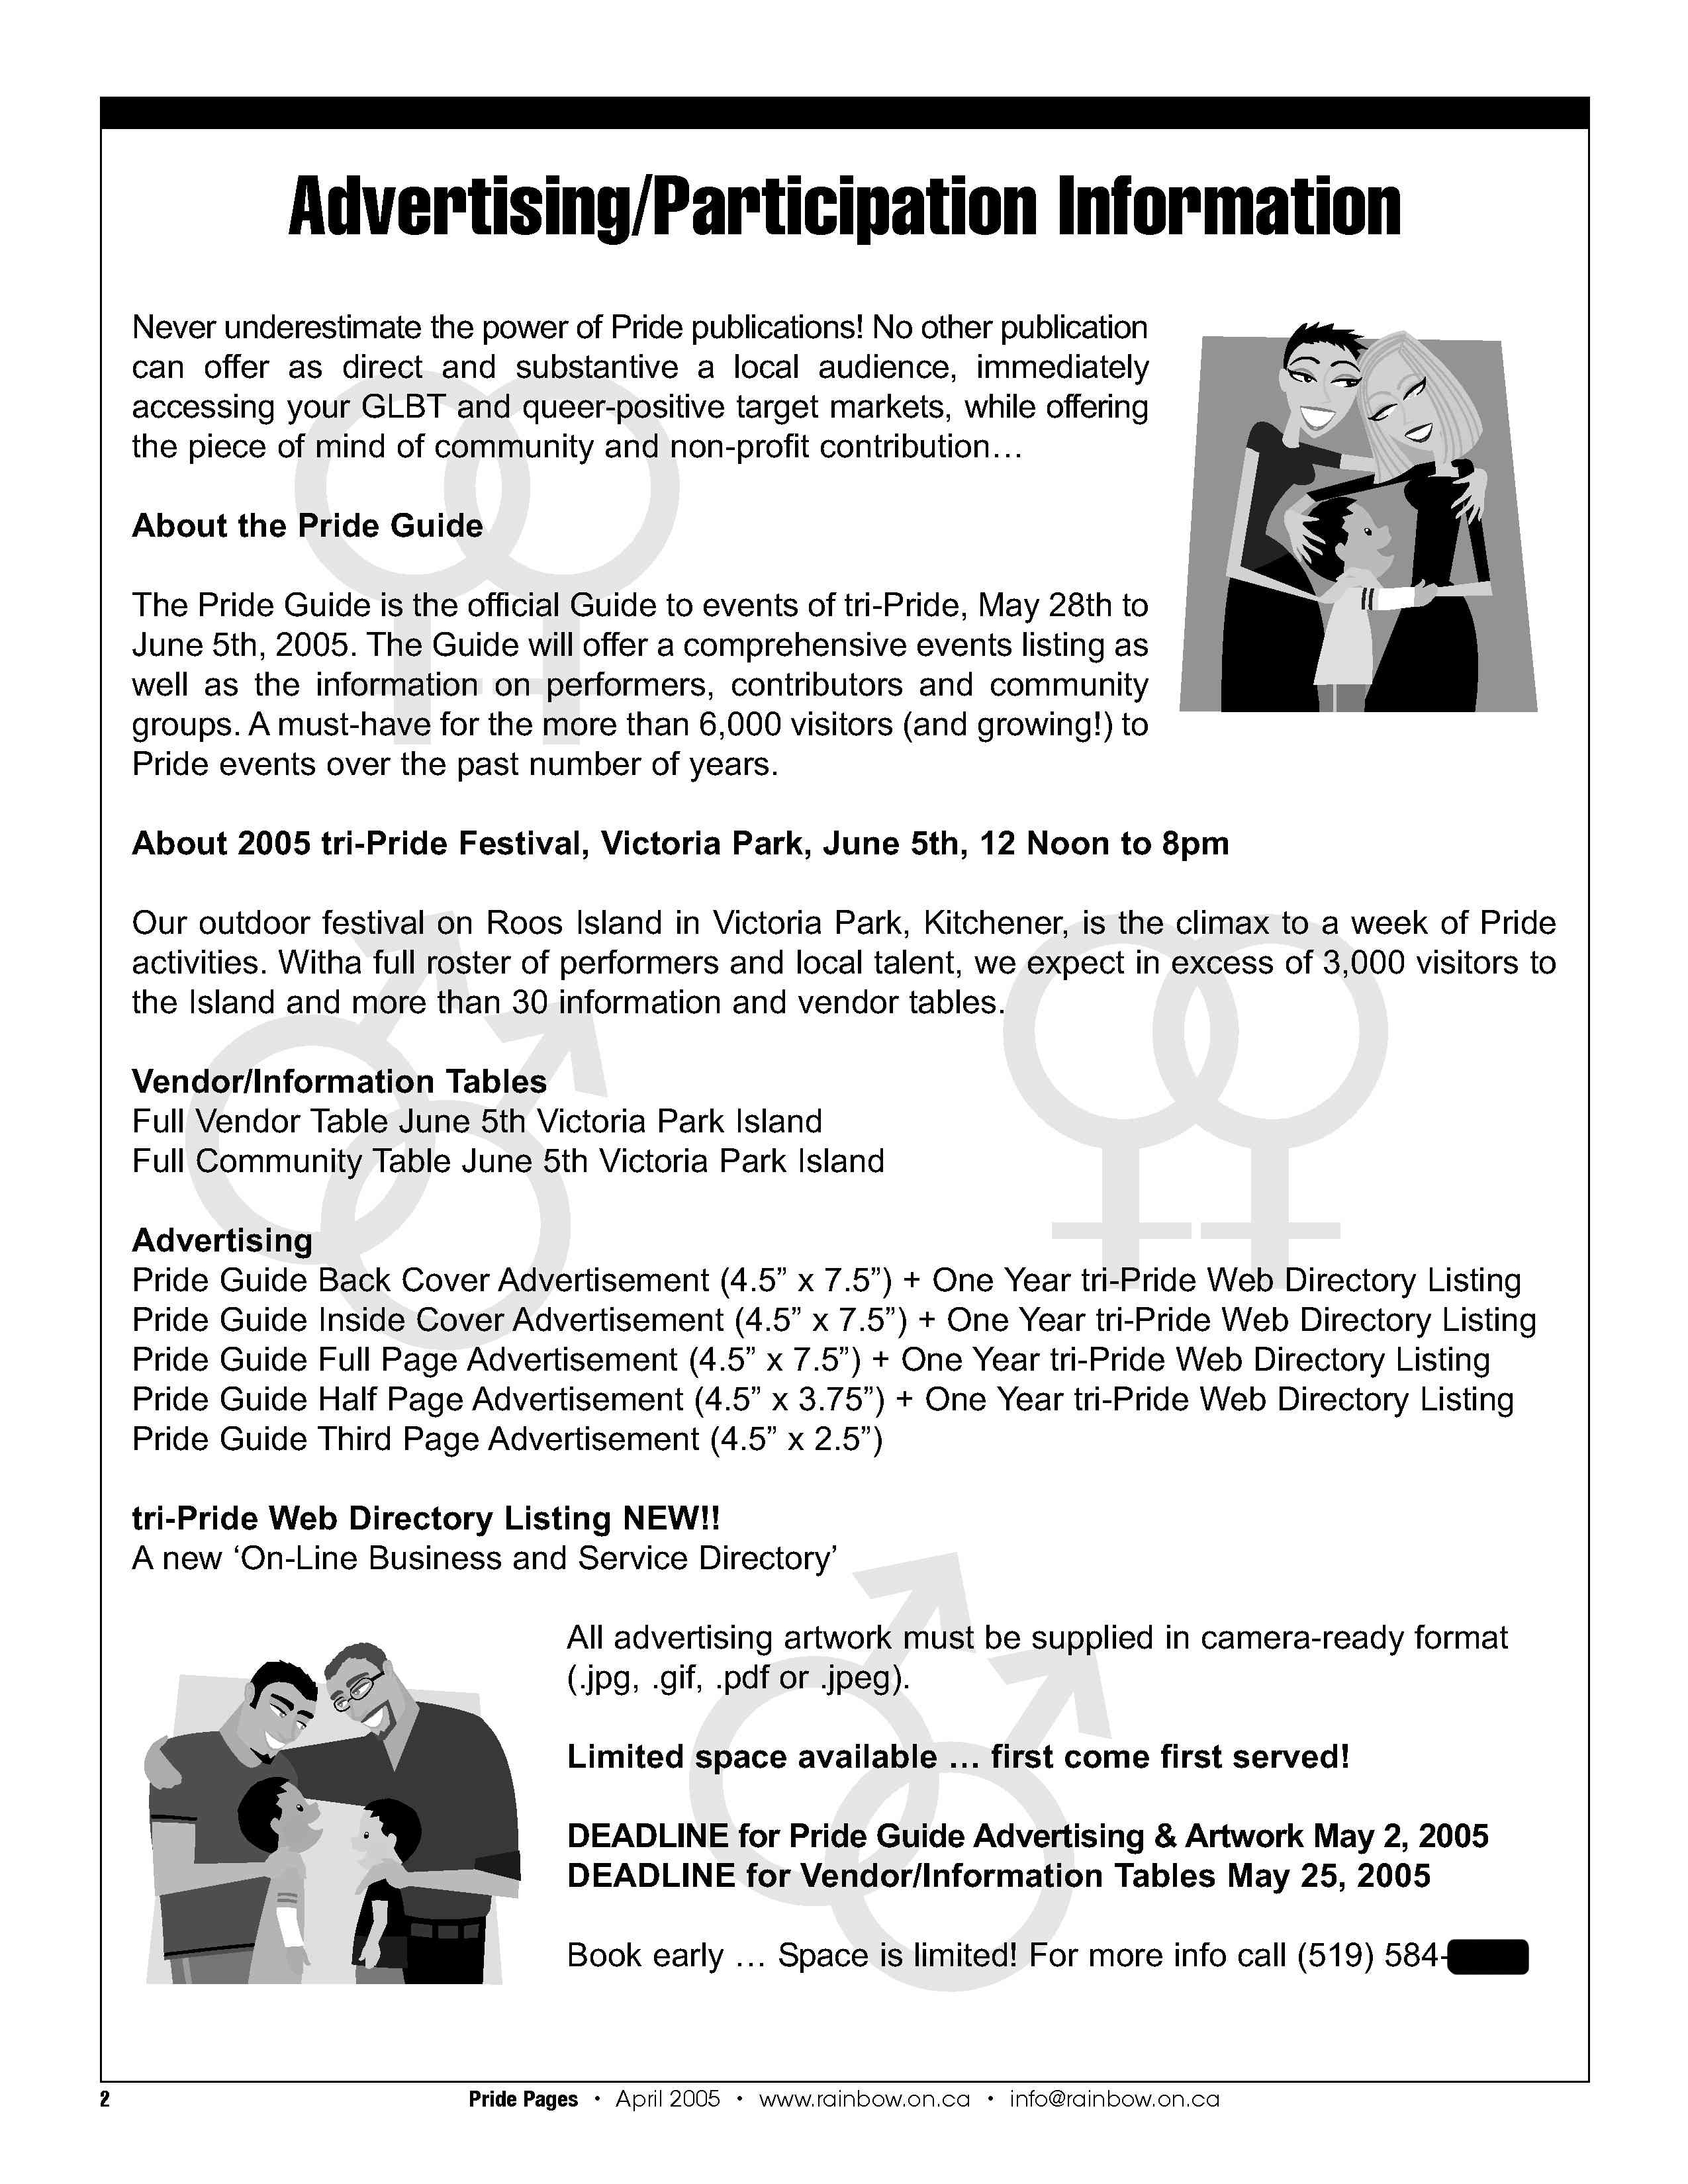 Pride Pages 2005-04 p2